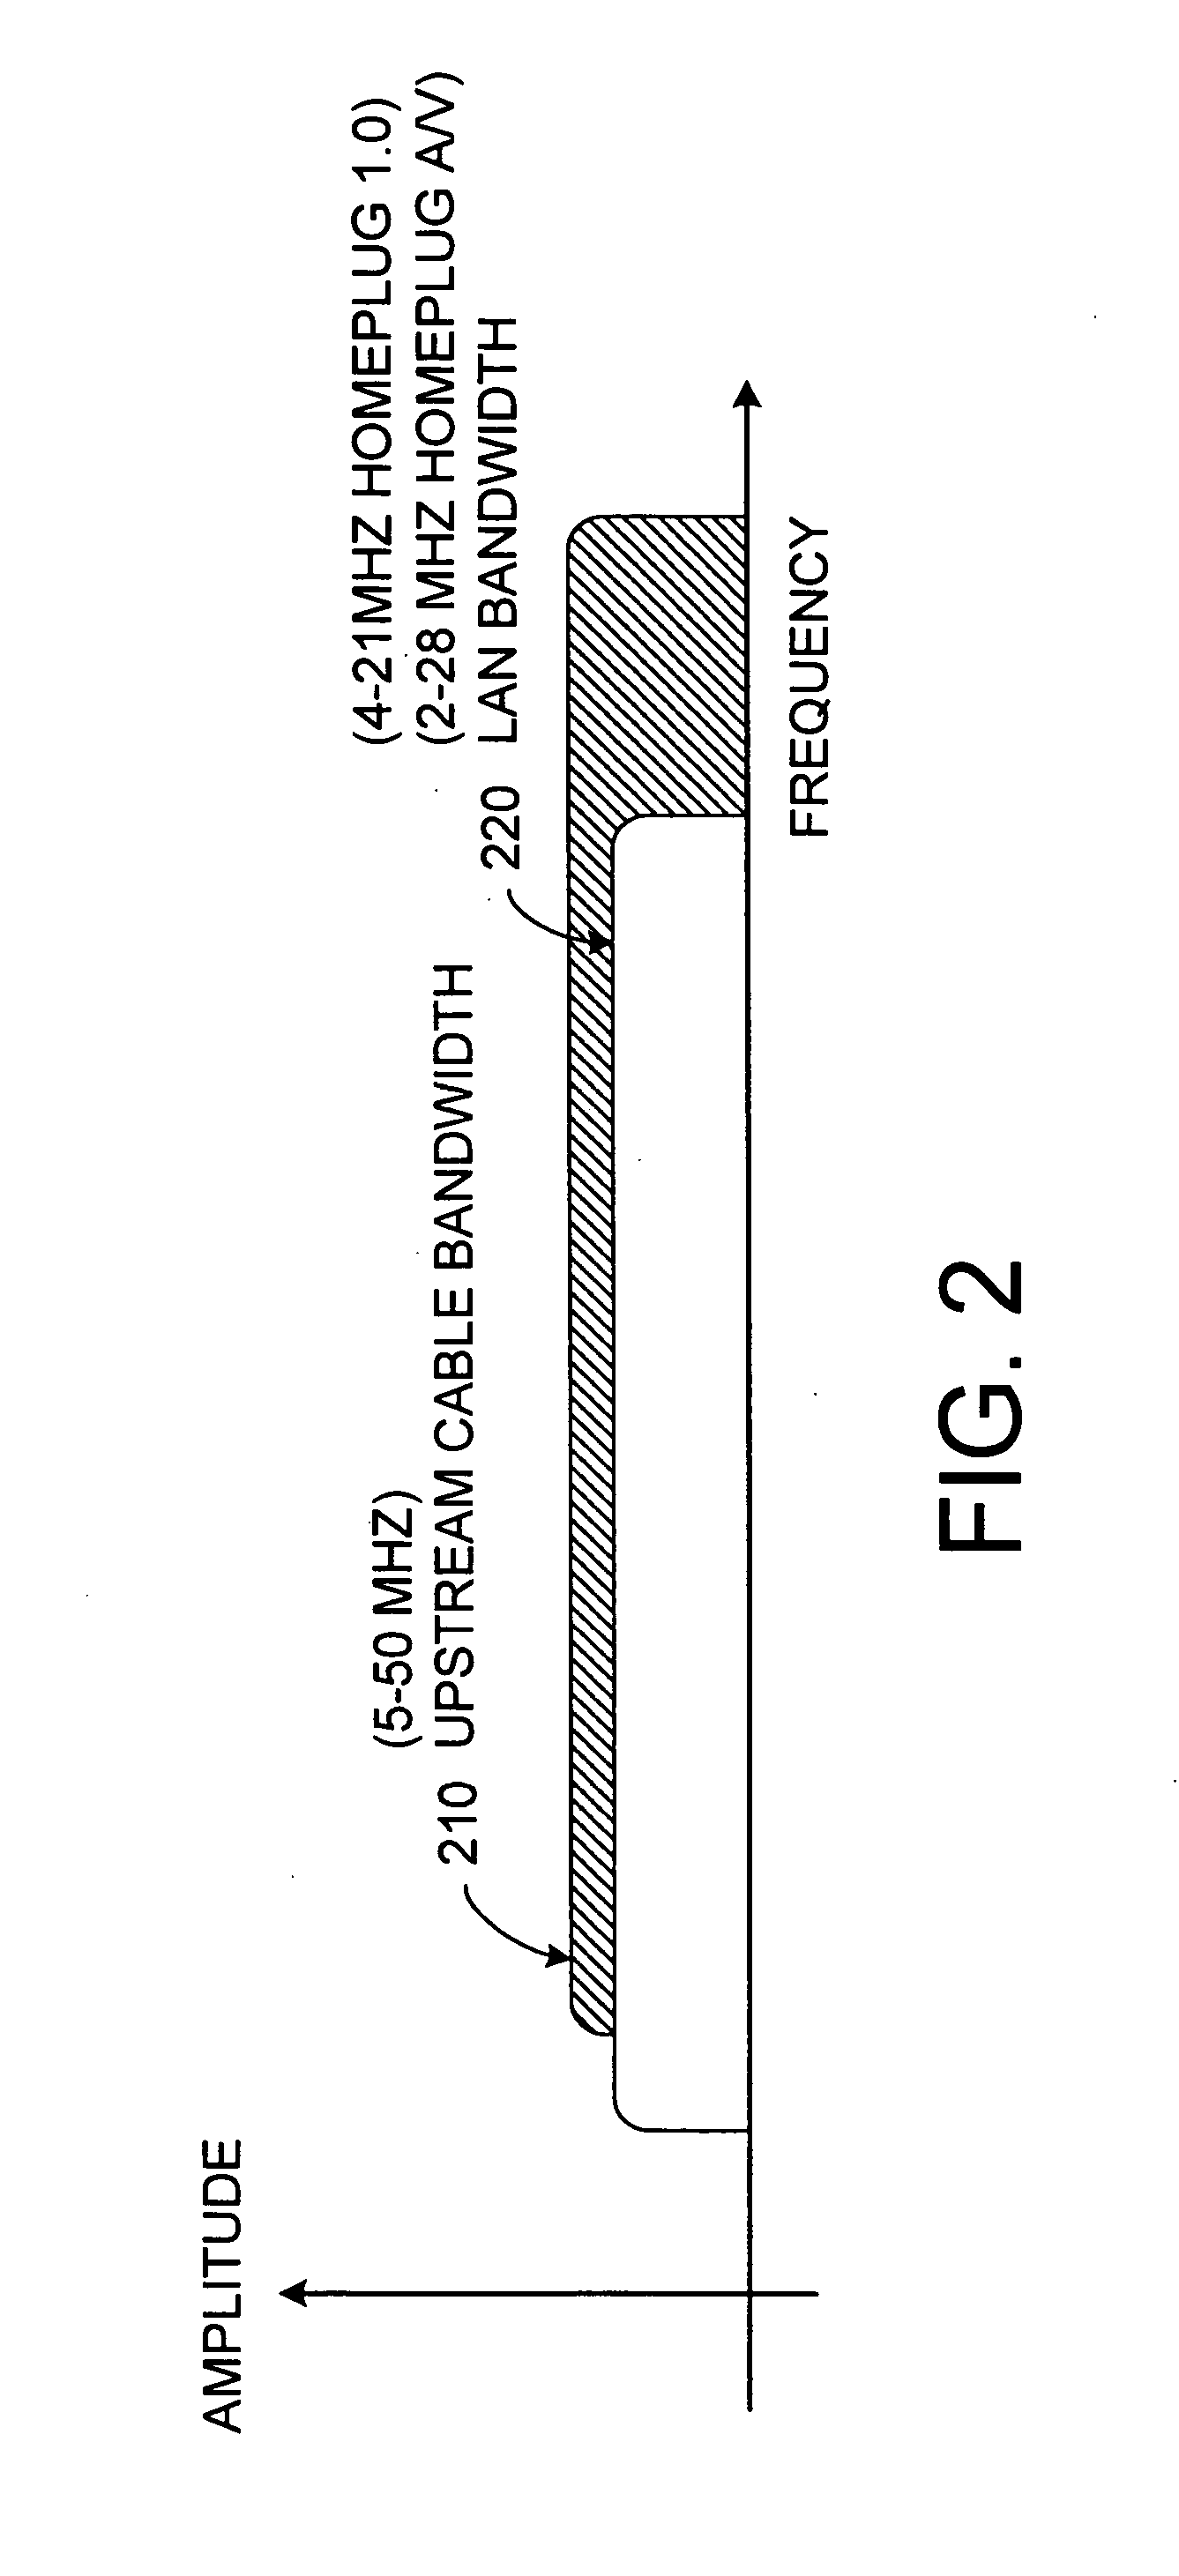 Local area network above cable television methods and devices